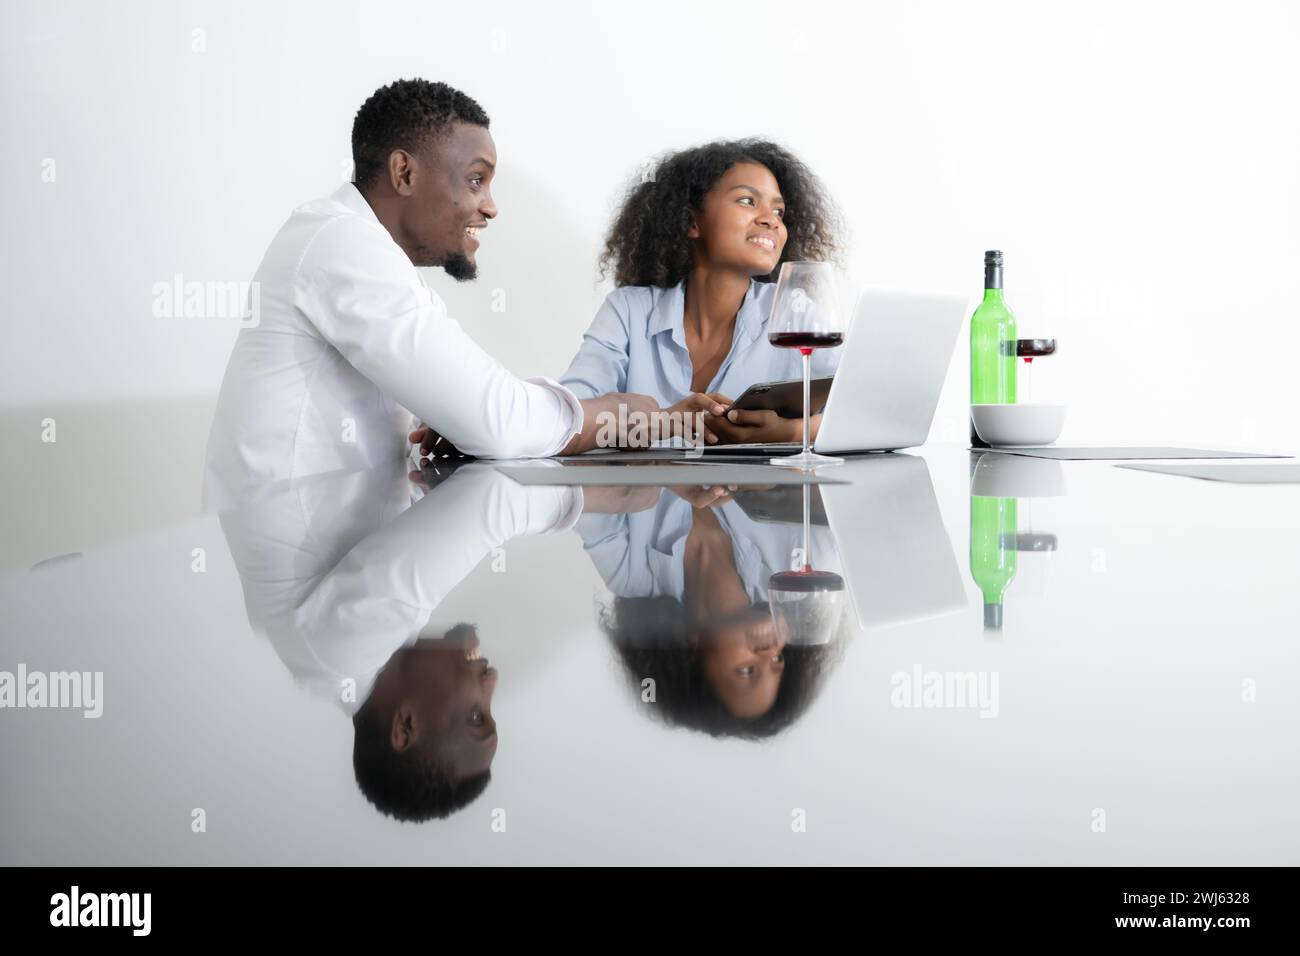 Both of young businesses drinking wine and use their laptops to share information with each other in their living room of house. Stock Photo